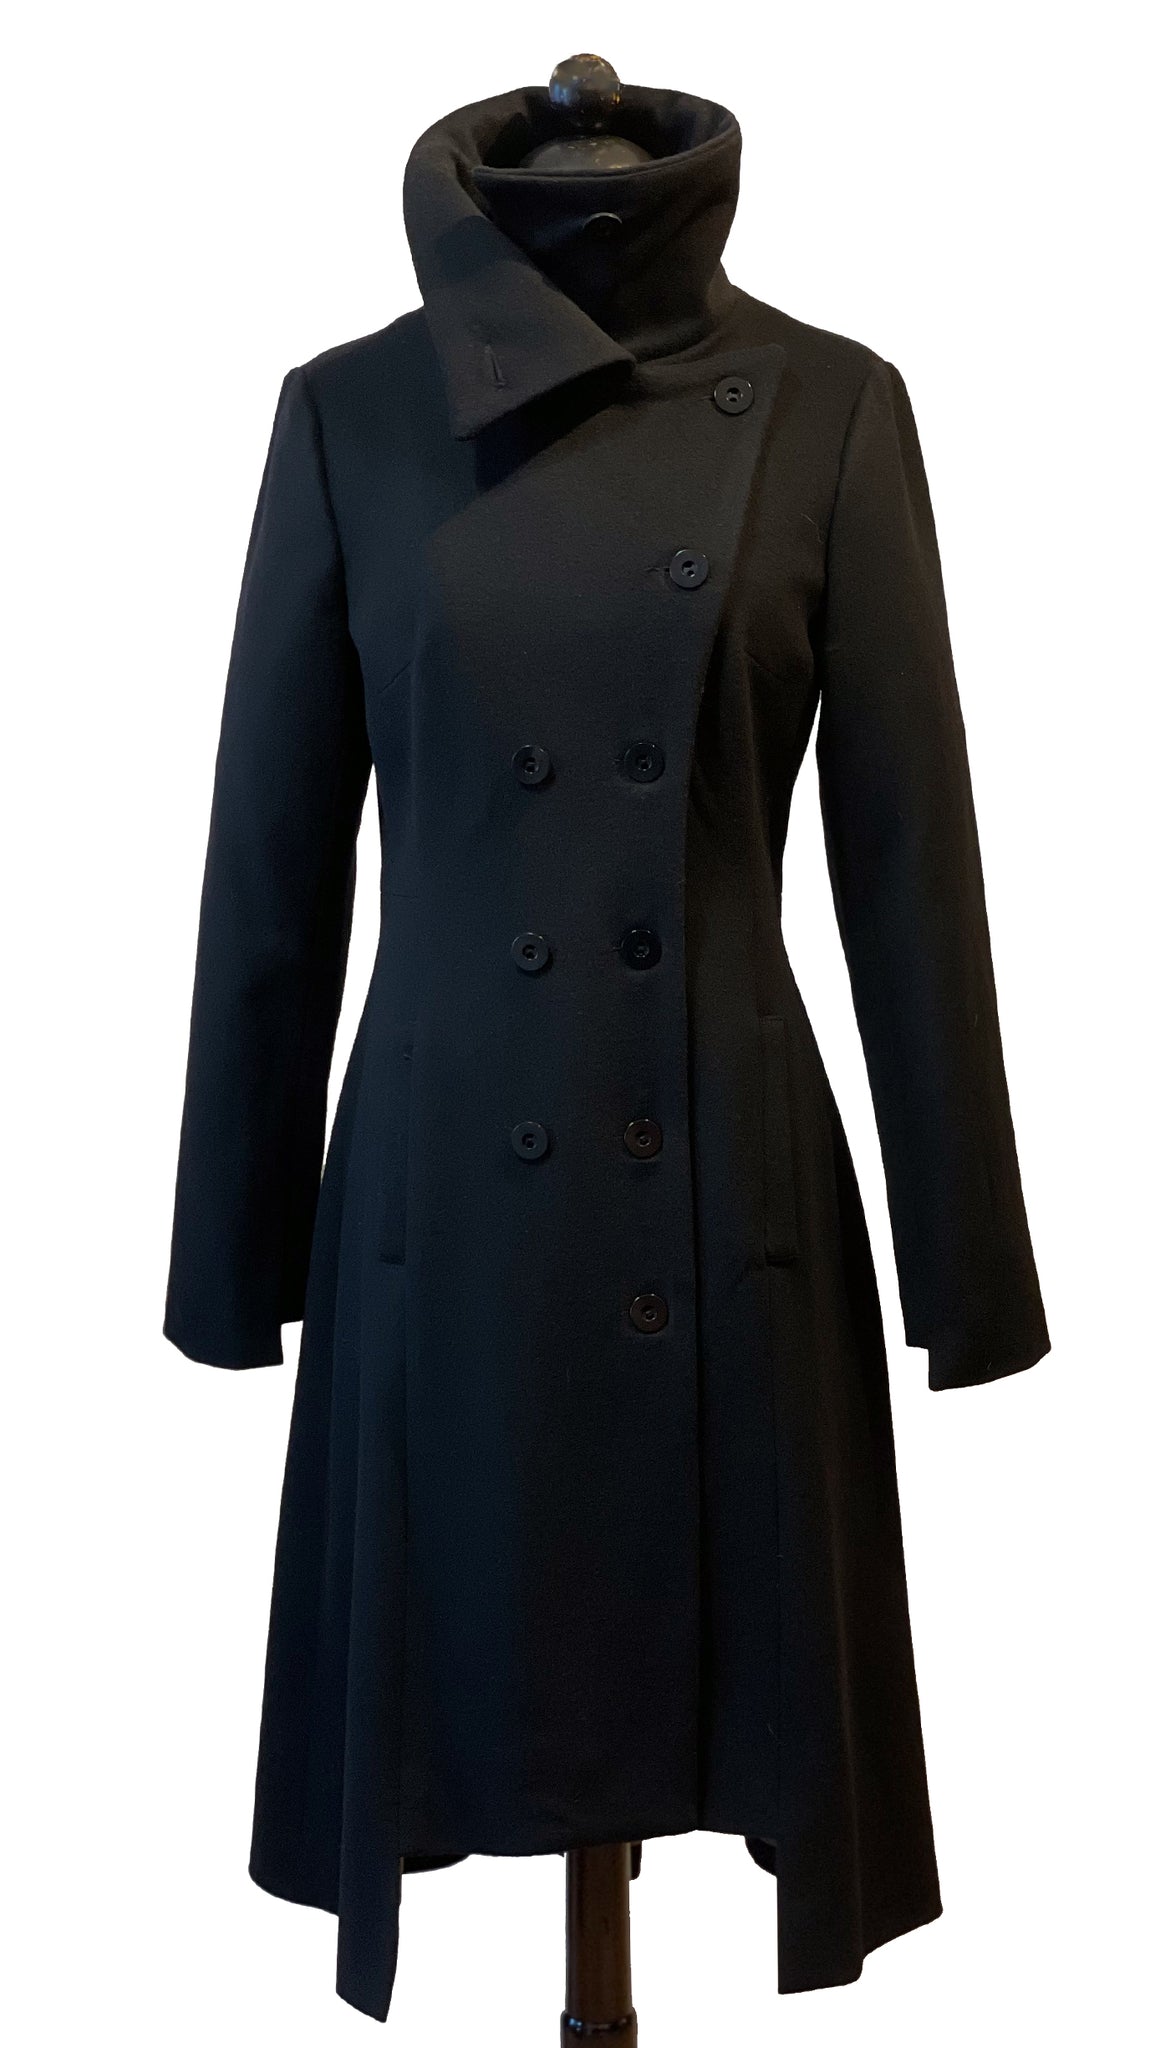 Military Button Up Coat/  Wool/Cashmere Blend/ Black